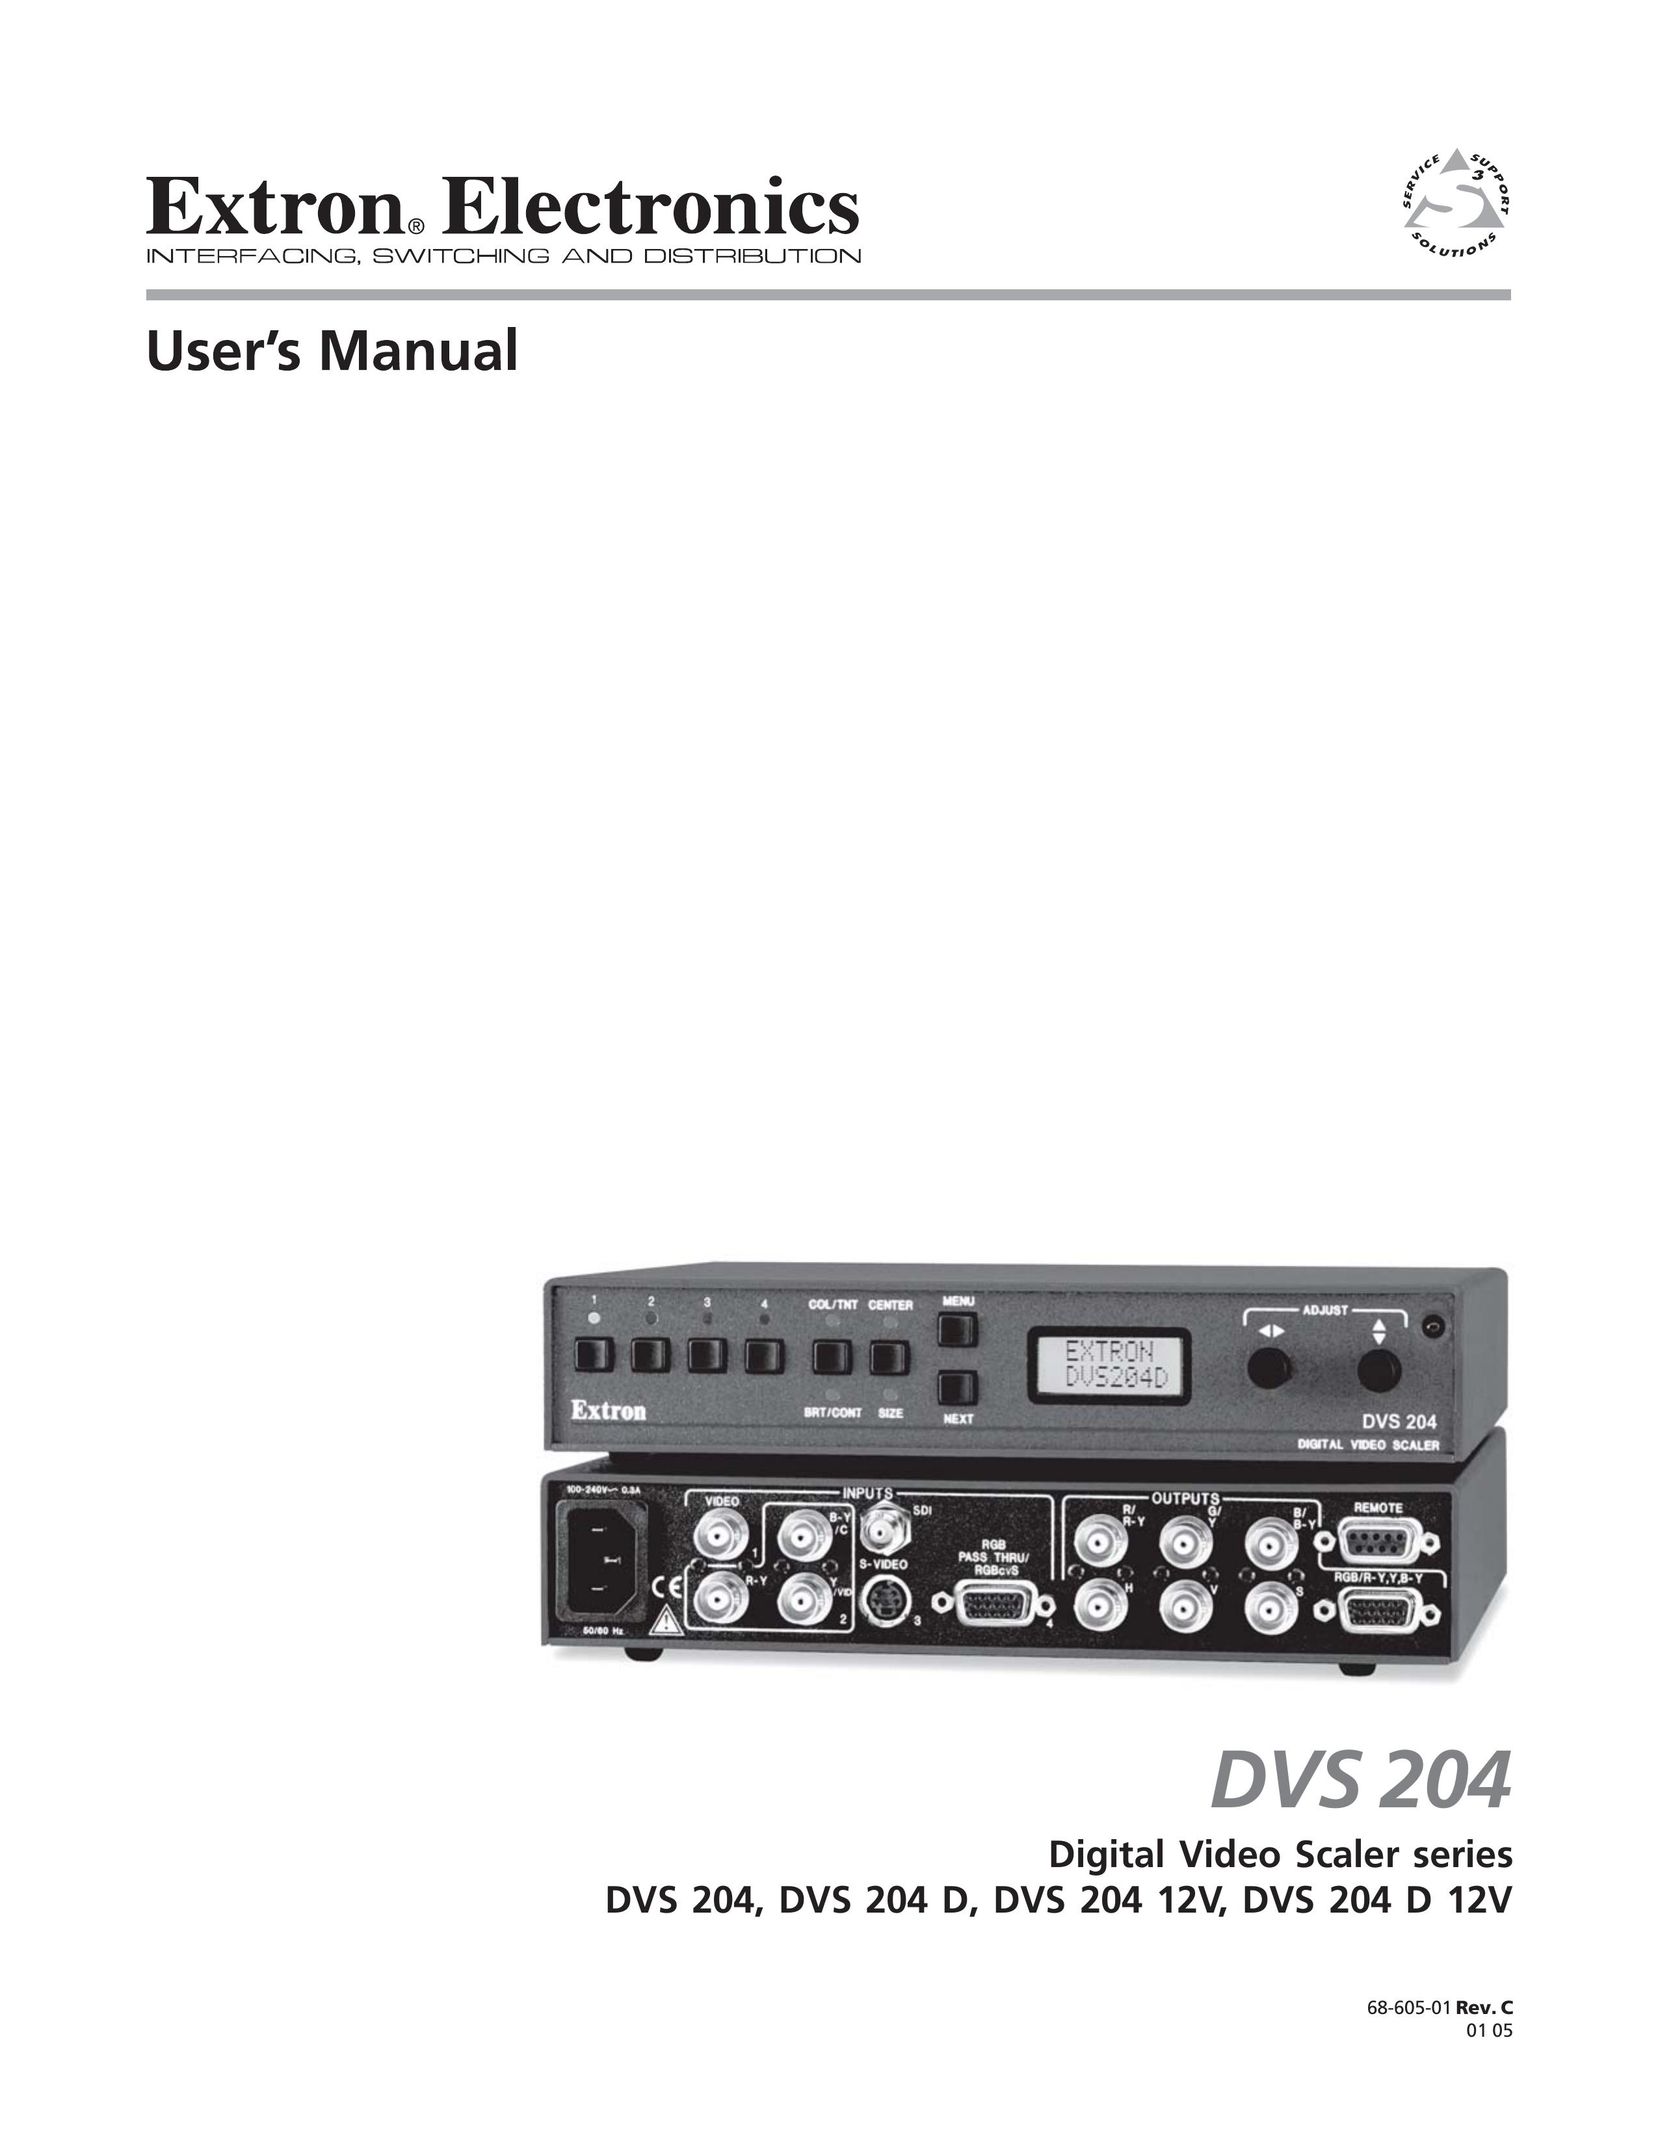 Extron electronic DVS 204 D Stereo Receiver User Manual